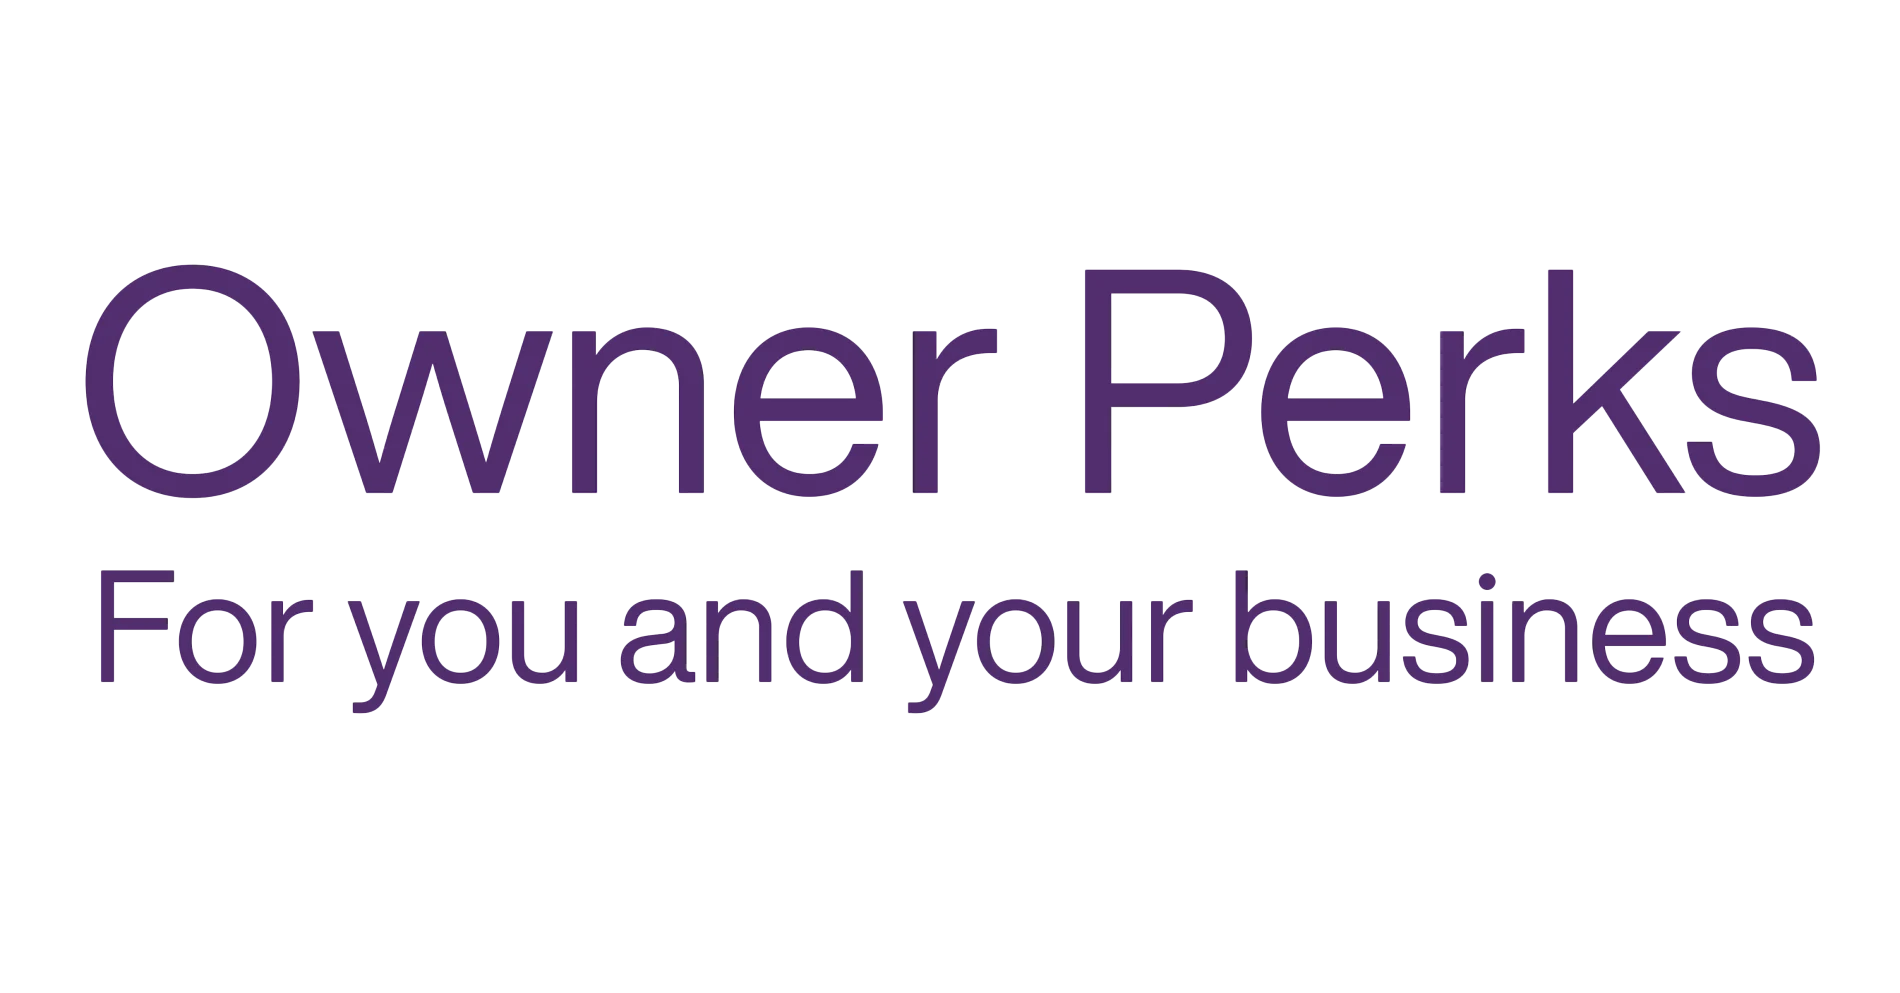 Owner Perks for you and your business